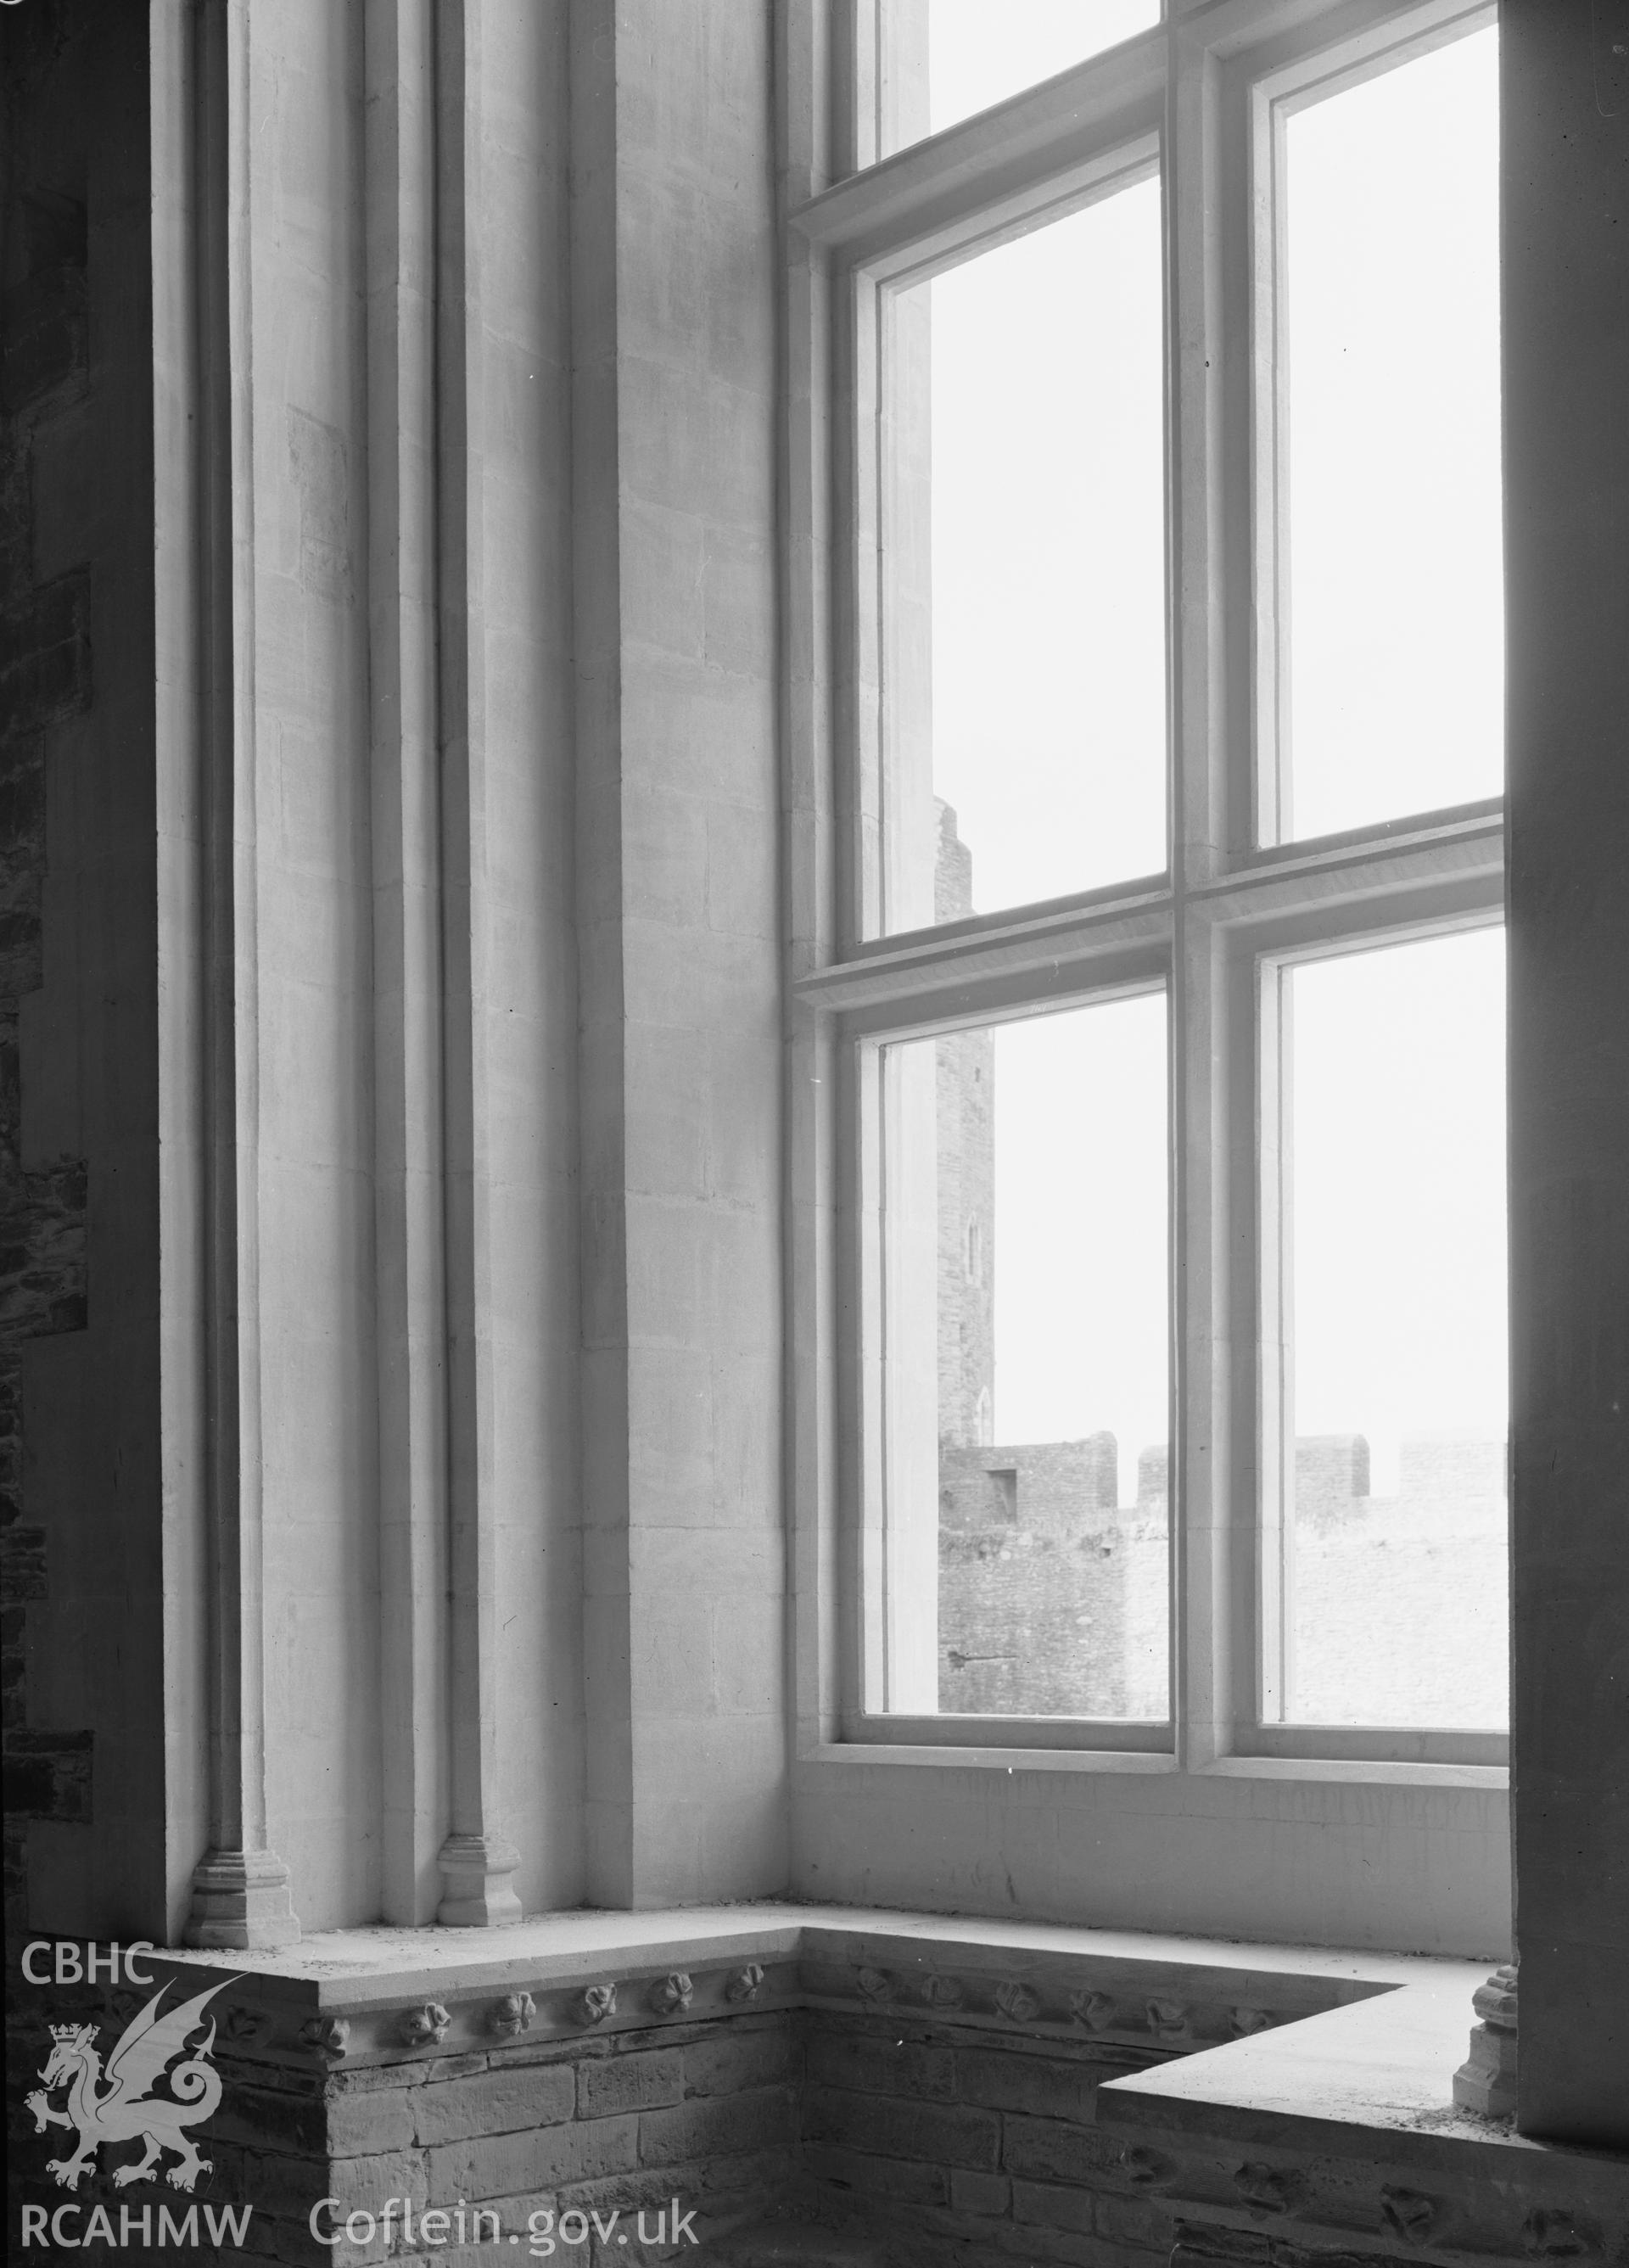 D.O.E photographs of Caerphilly Castle - windows in Hall, west jamb of window No3 and window seat.